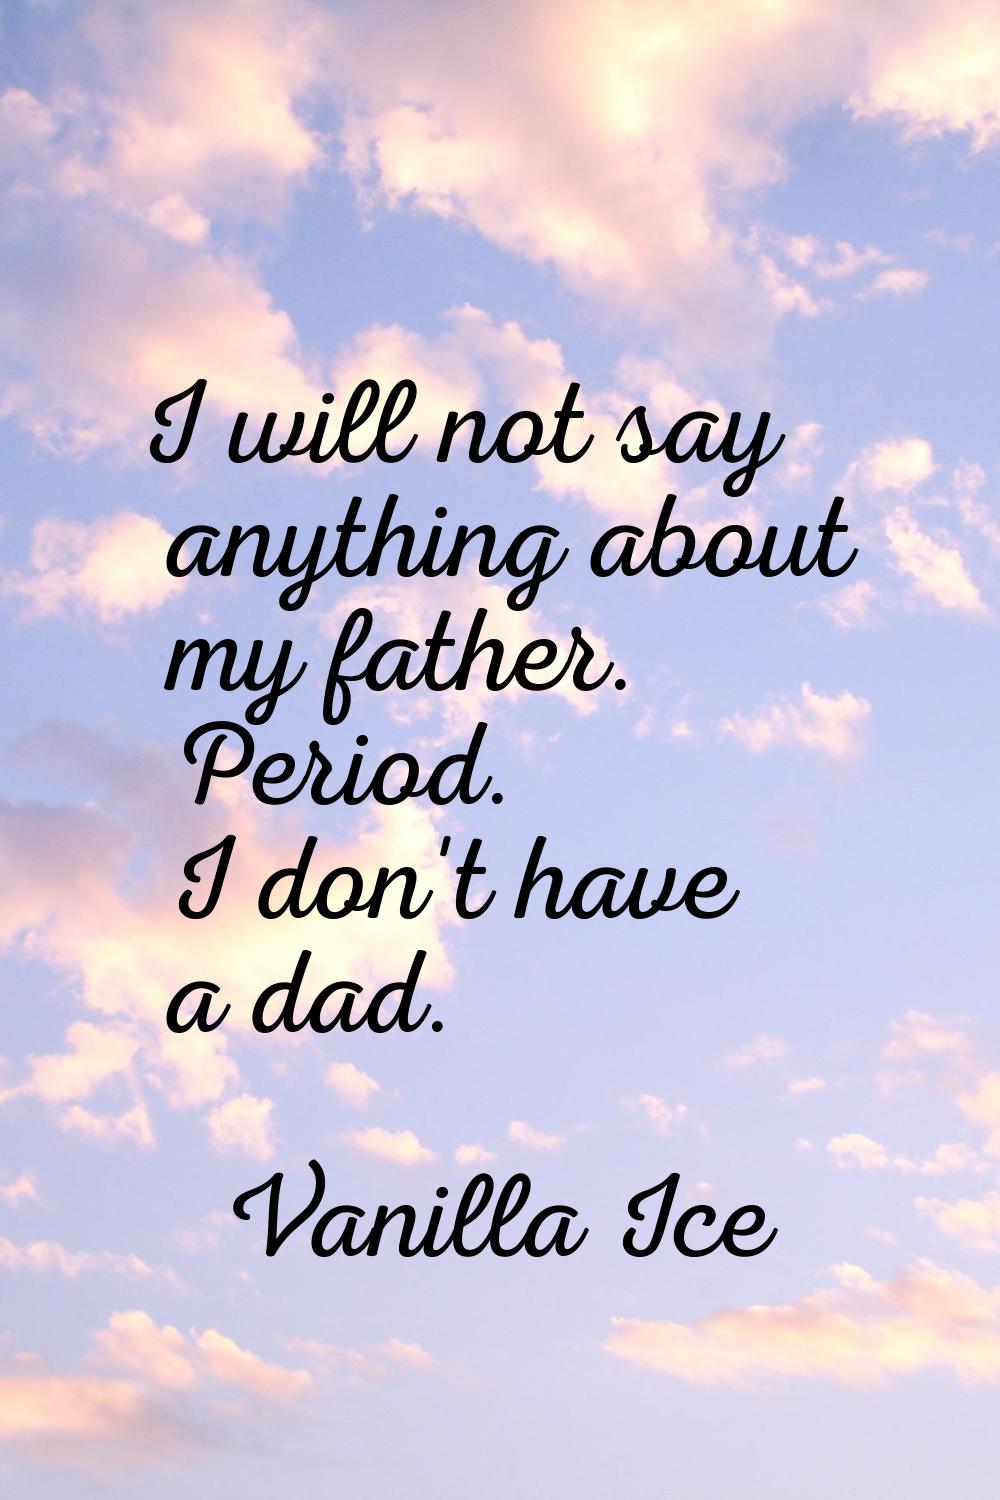 I will not say anything about my father. Period. I don't have a dad.